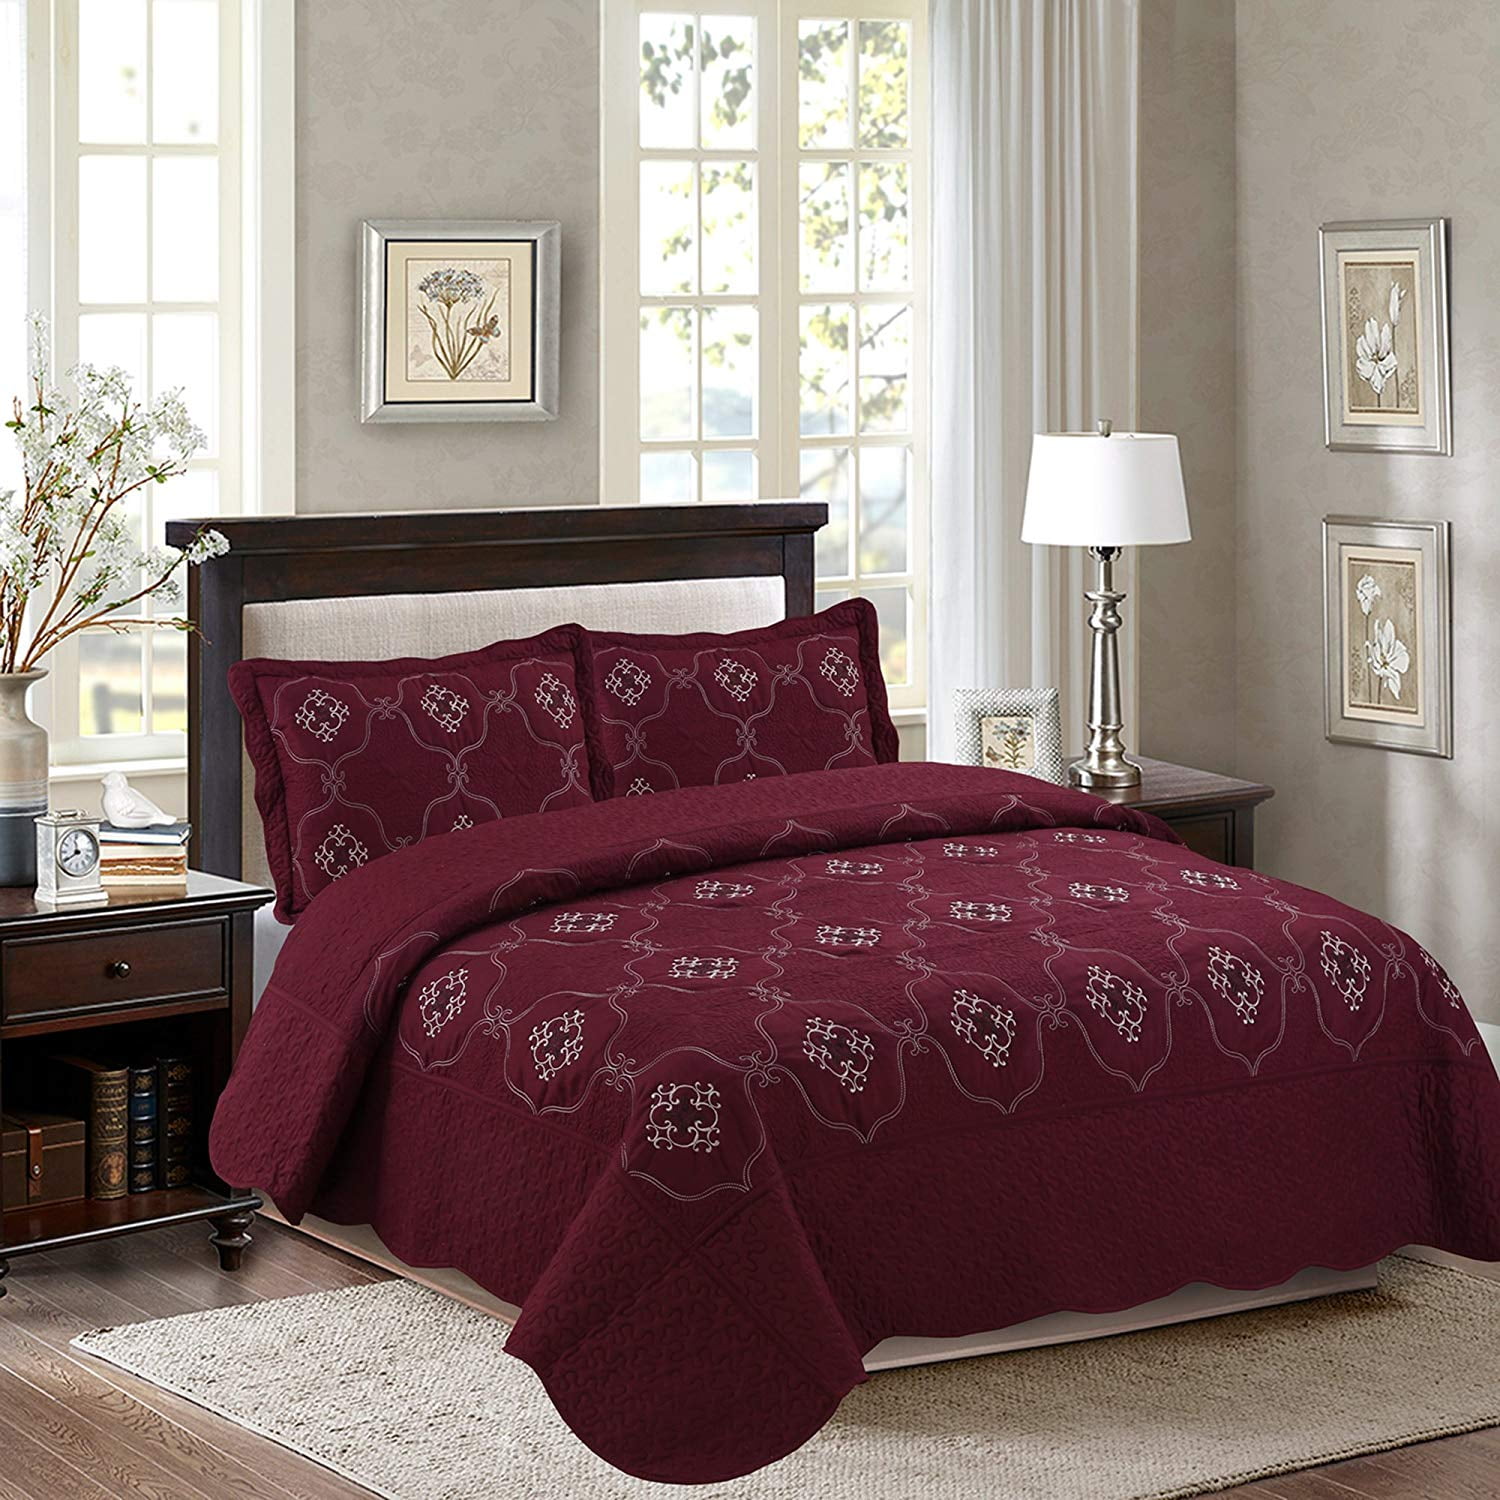 Emma 3Pcs Embroidery Quilts Bedspreads Set Bedding Coverlet Set Queen Oversized 